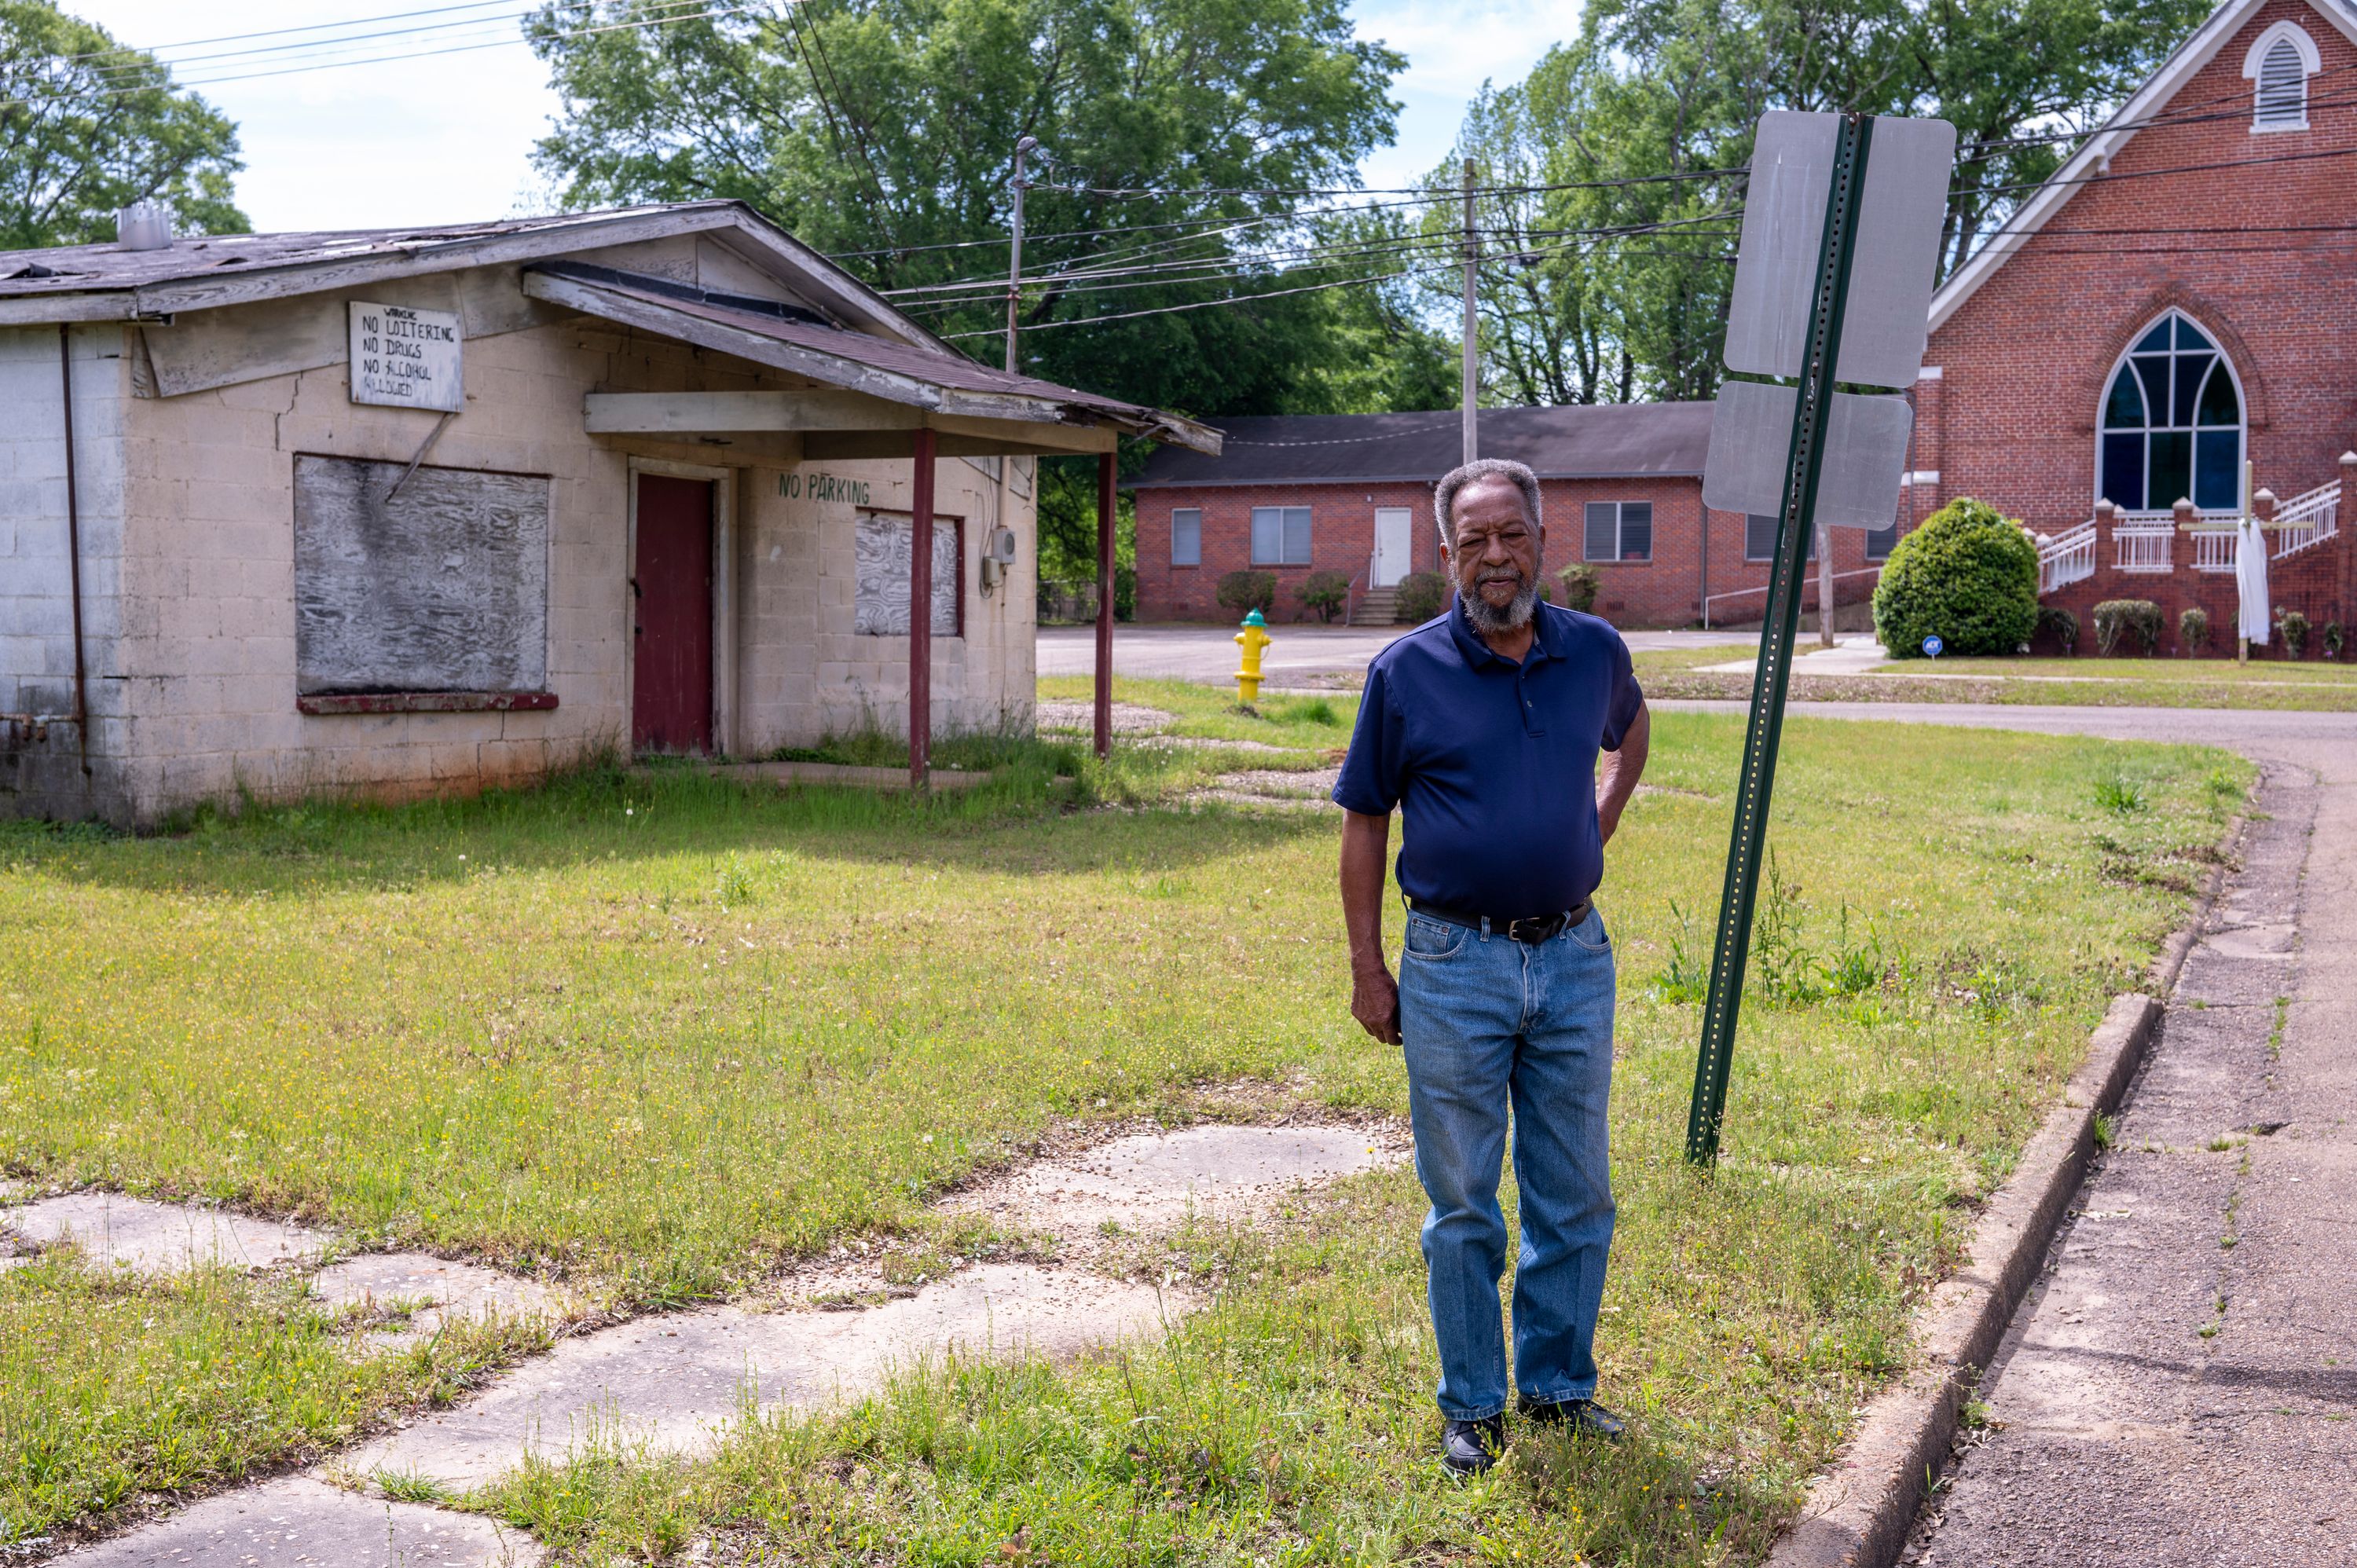 Bill Smith stands on Jones Street in Ruston, Louisiana, in front of the former cafe, near the spot where John Wilder was killed. Photo by Ben Greenberg